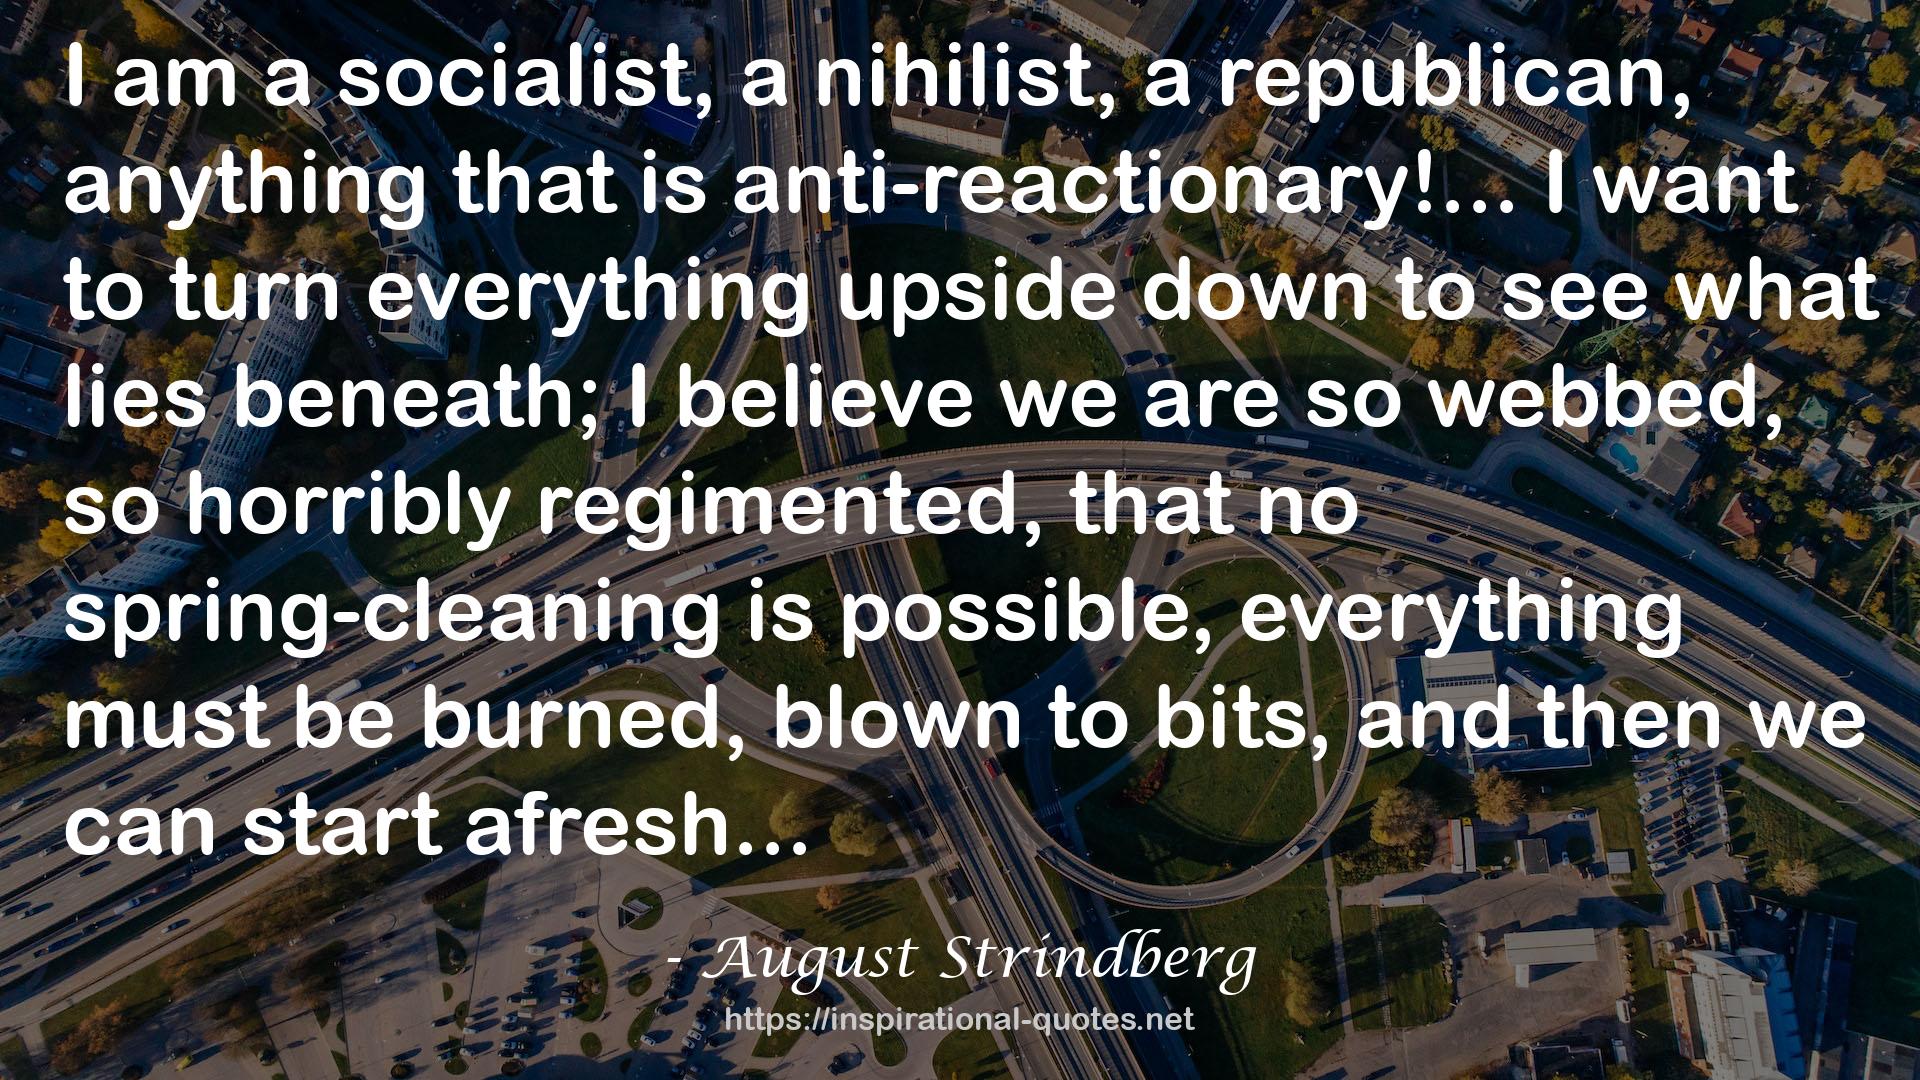 August Strindberg QUOTES